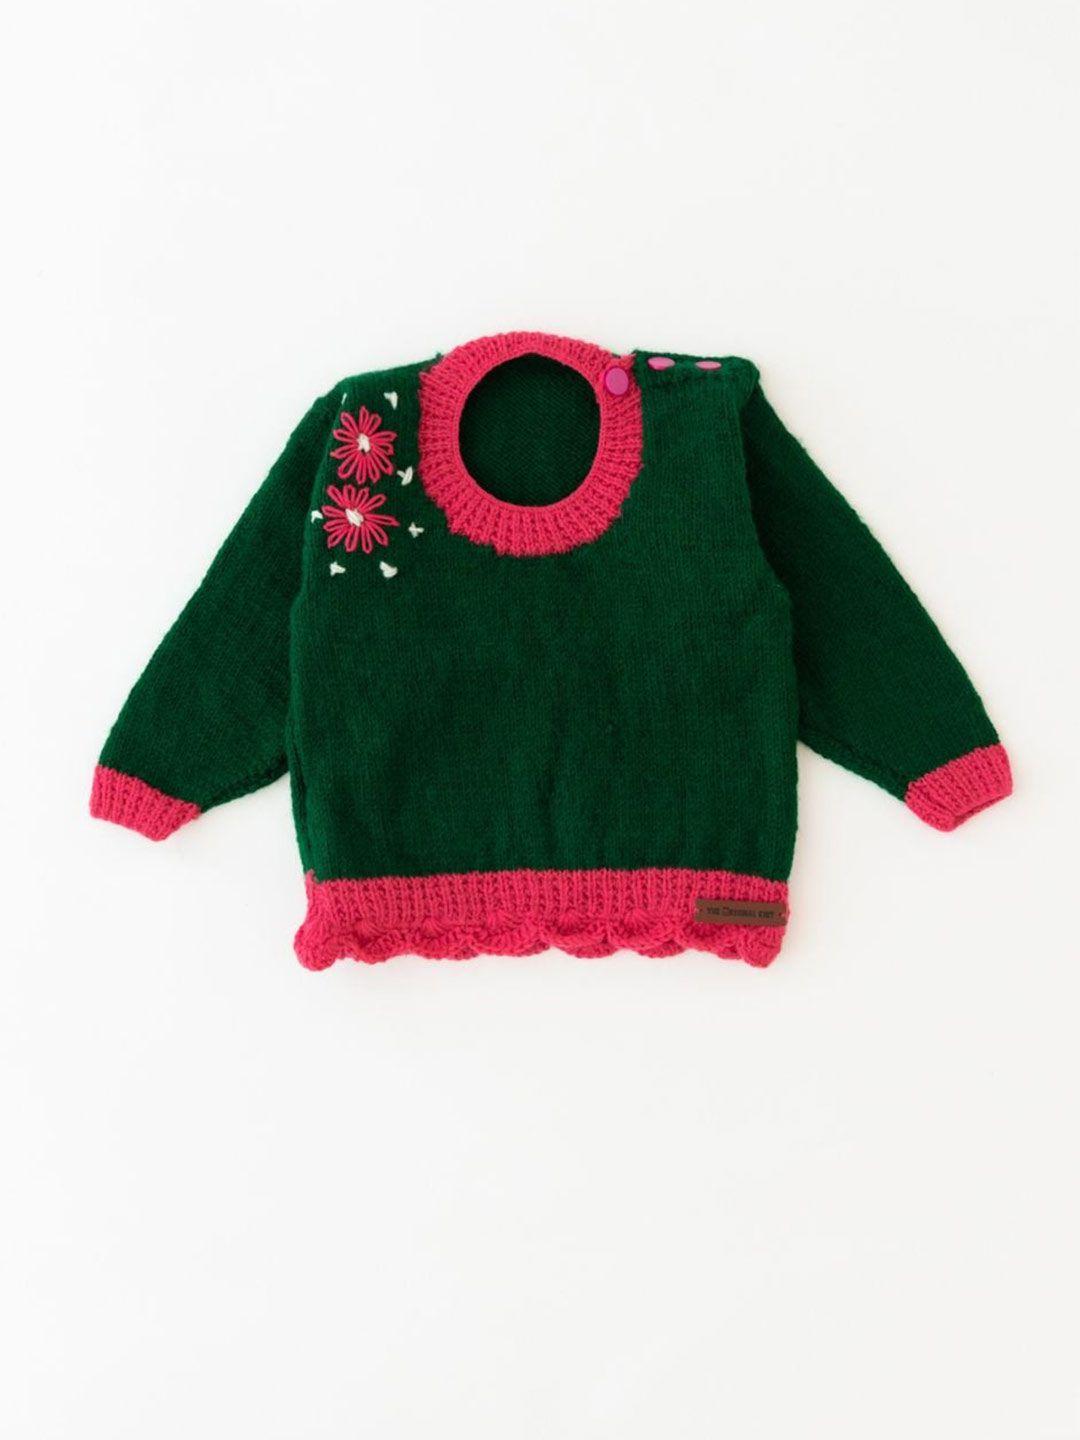 the original knit unisex kids green & pink floral pullover